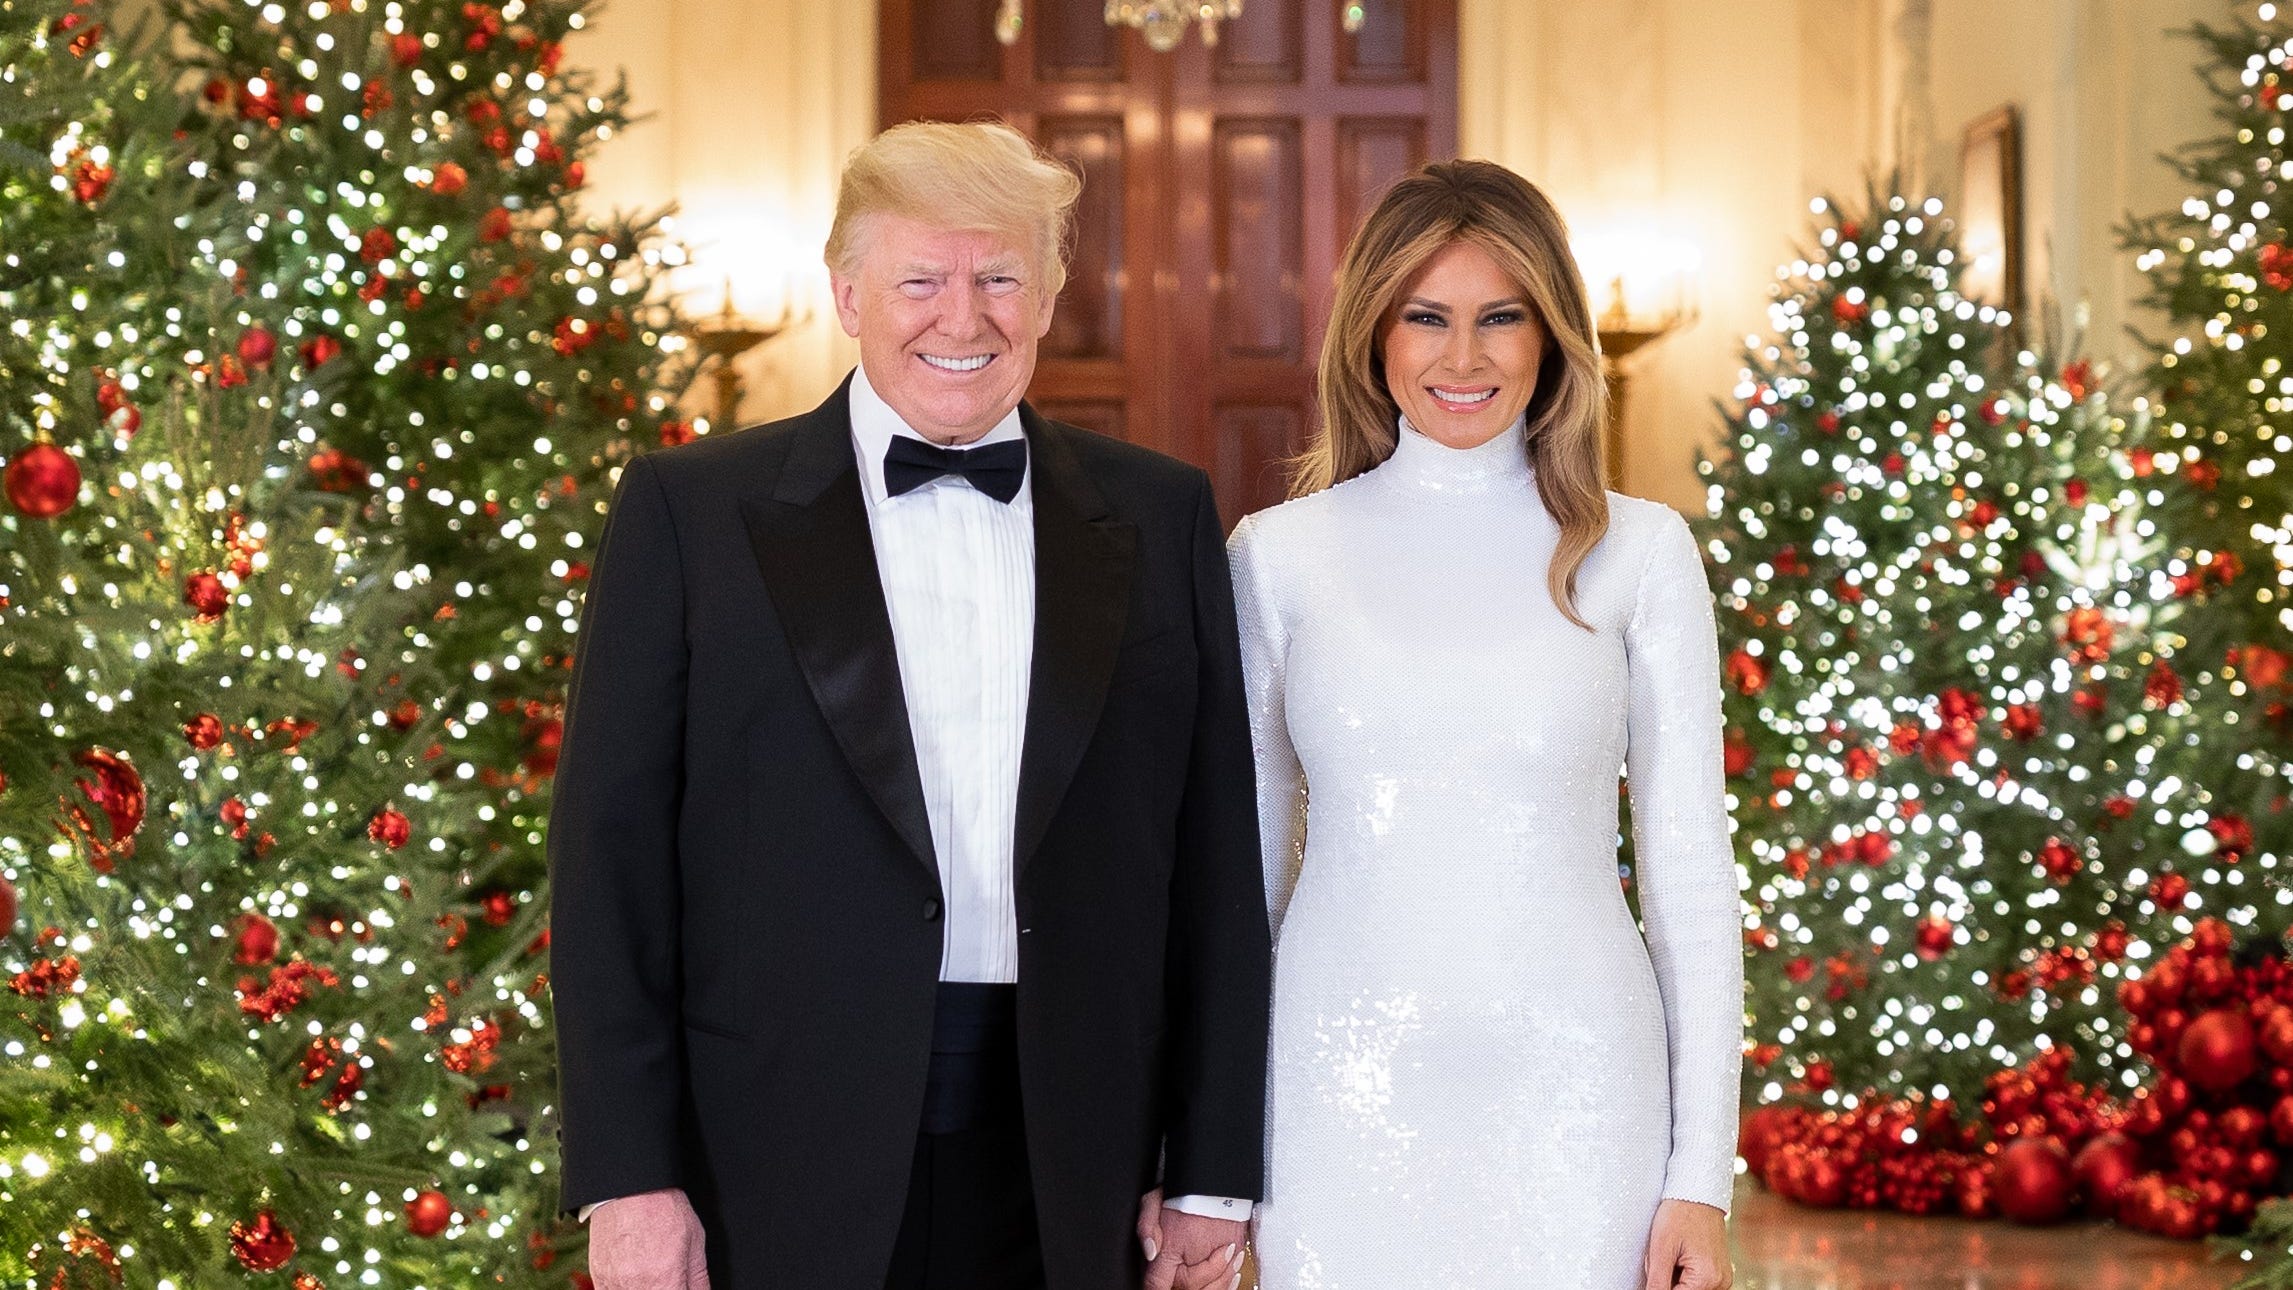 will federal employees get christmas eve off 2020 Donald Trump Gives Employees Christmas Eve Off Through Executive Order will federal employees get christmas eve off 2020